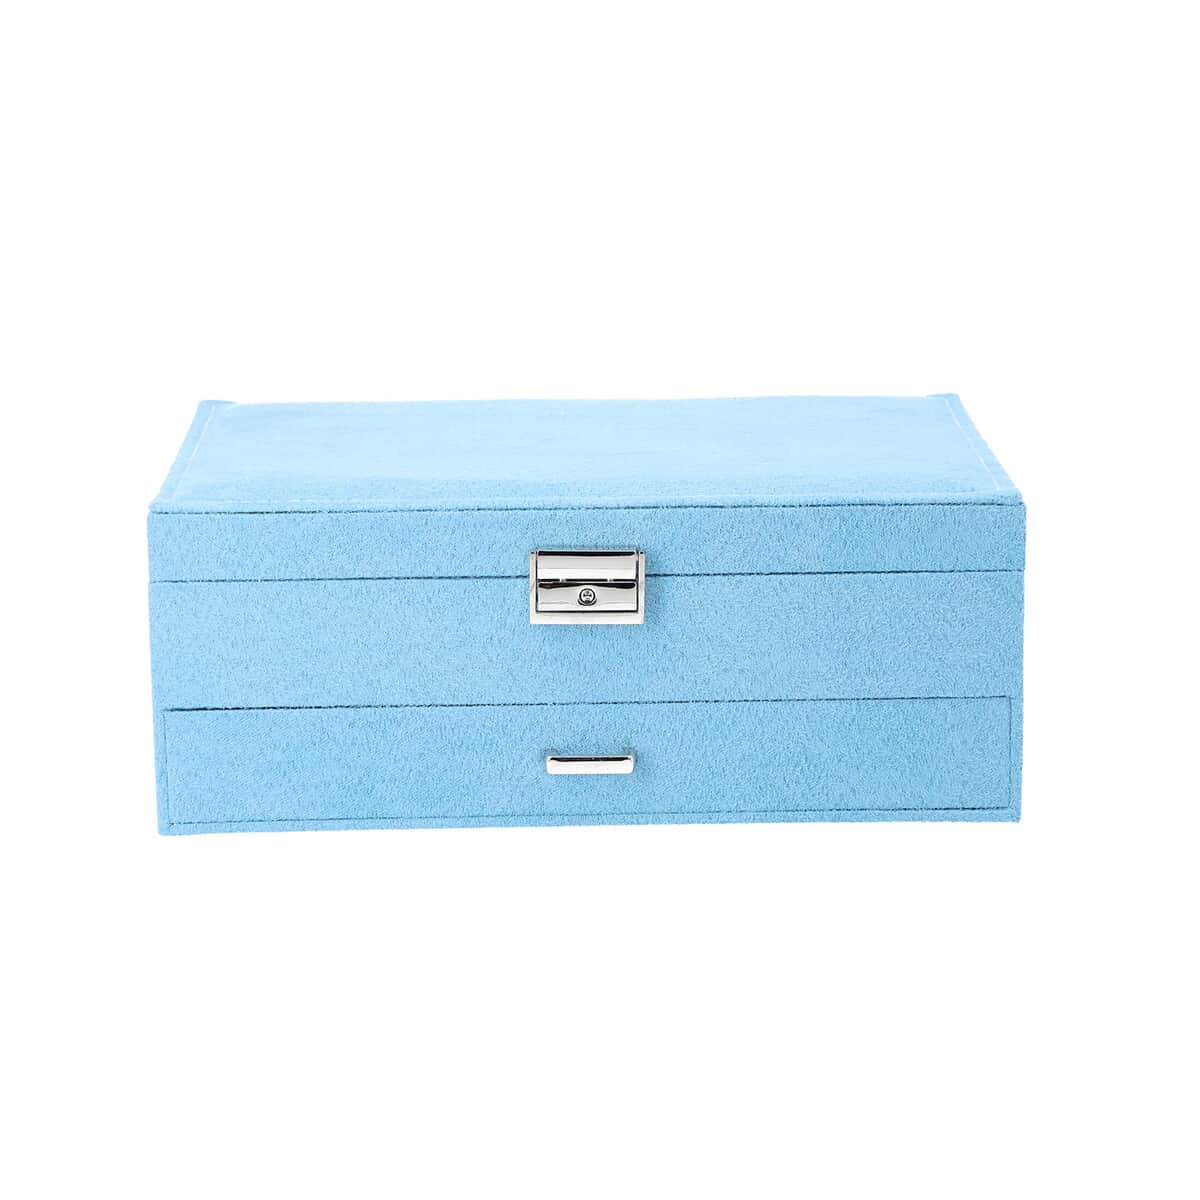 Sky Blue Velvet 2 Tier Jewelry Box with Lock and Key image number 3